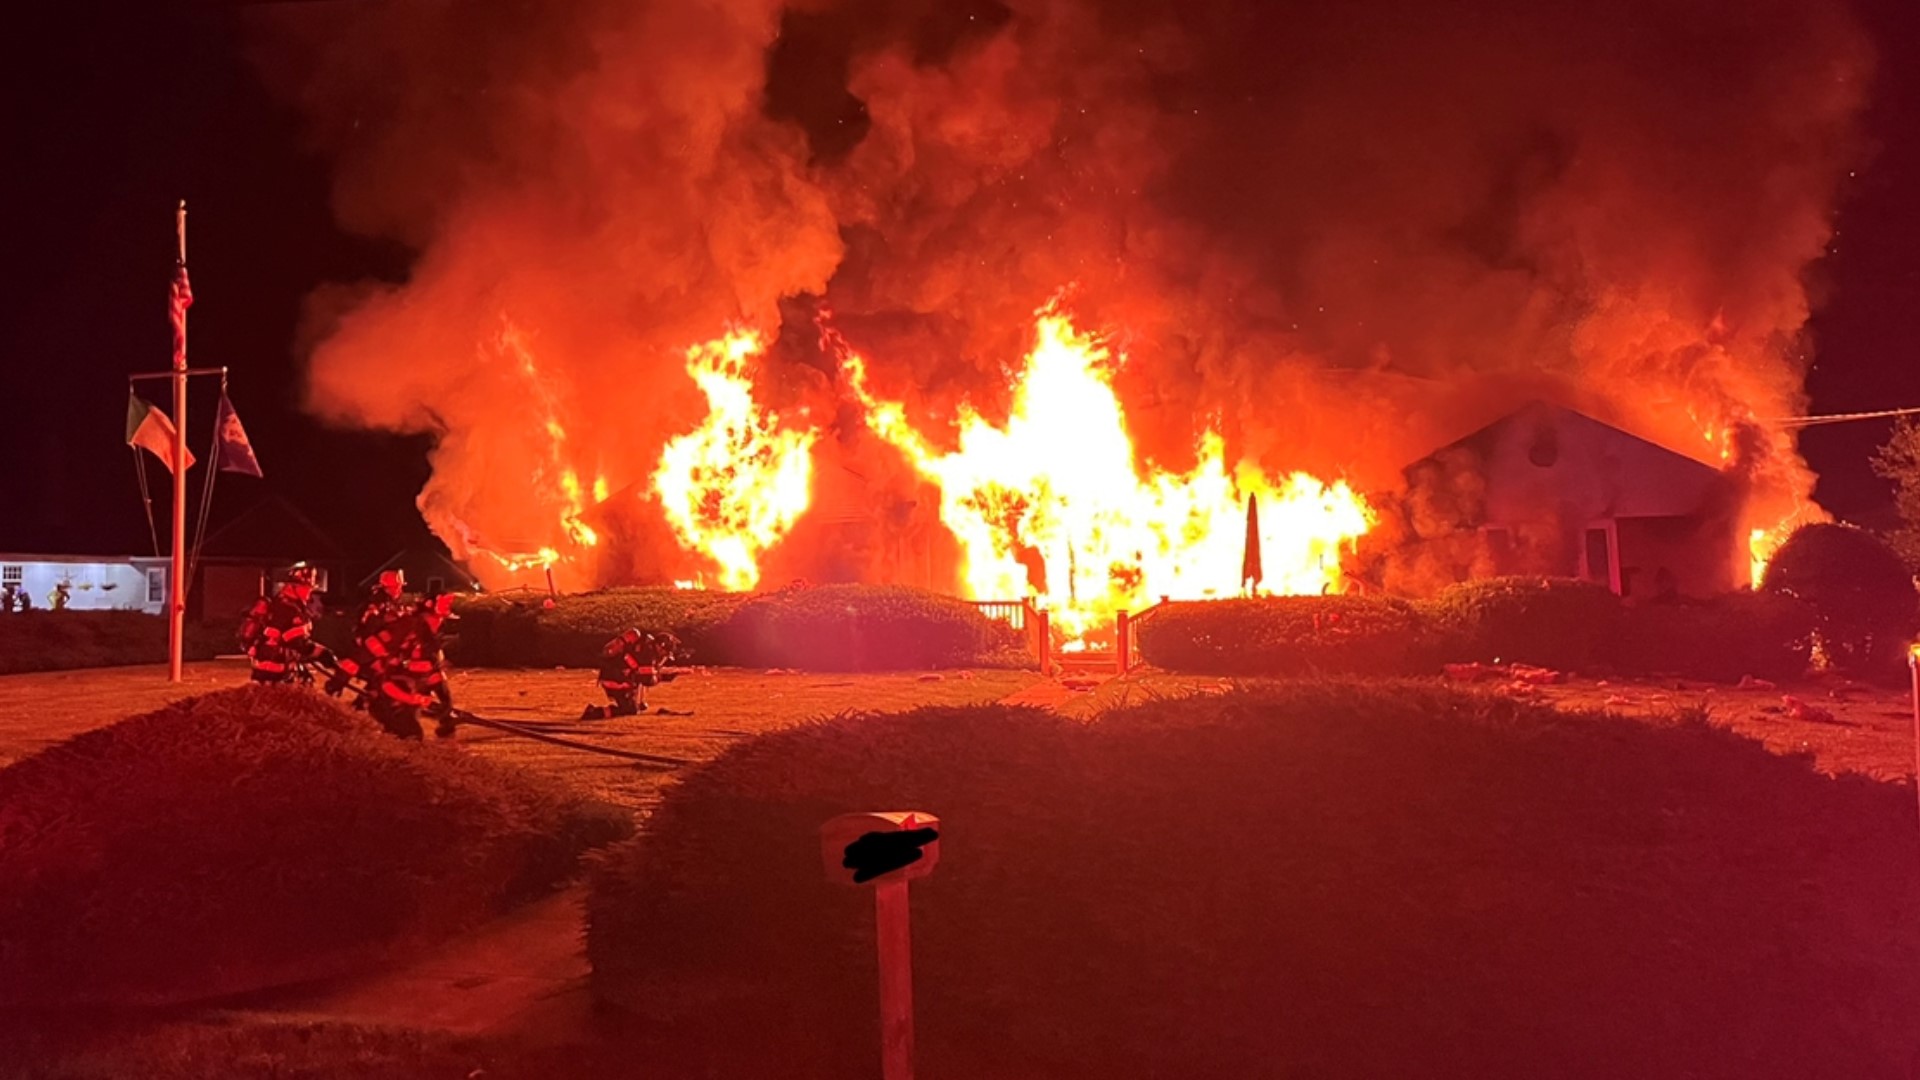 Neighbors on Maple Ave. in Old Saybrook are on edge Thursday after what officials said appeared to be an explosion that sparked a fire at a house.